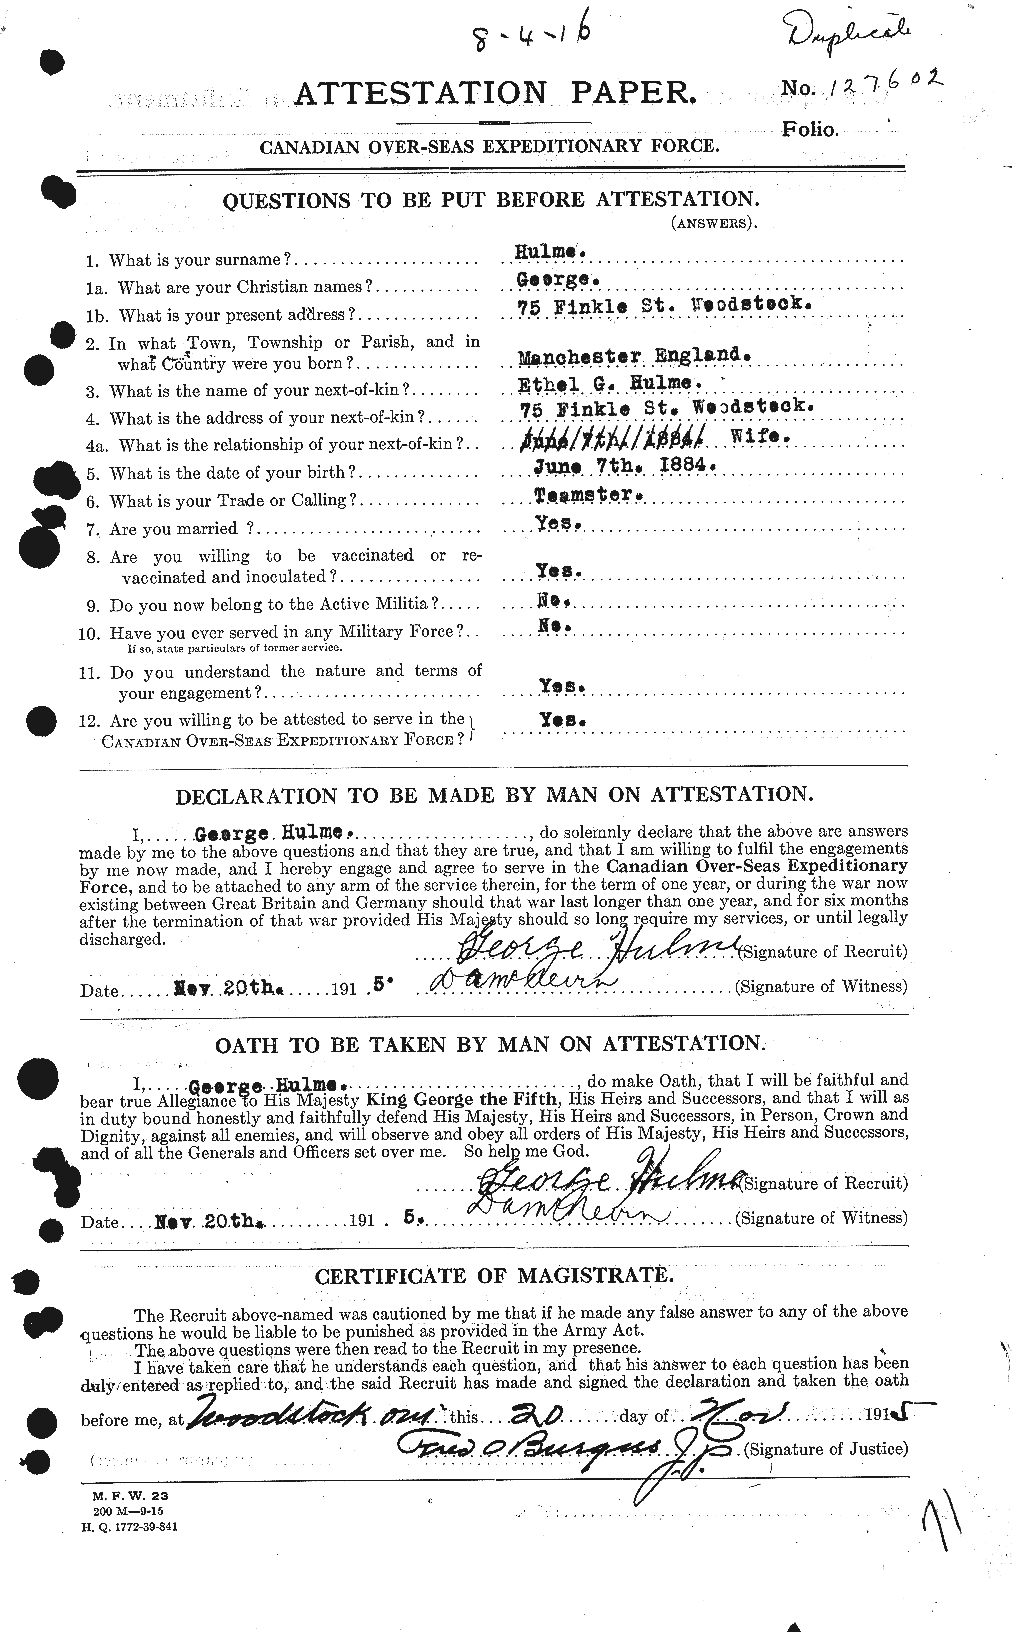 Personnel Records of the First World War - CEF 407101a